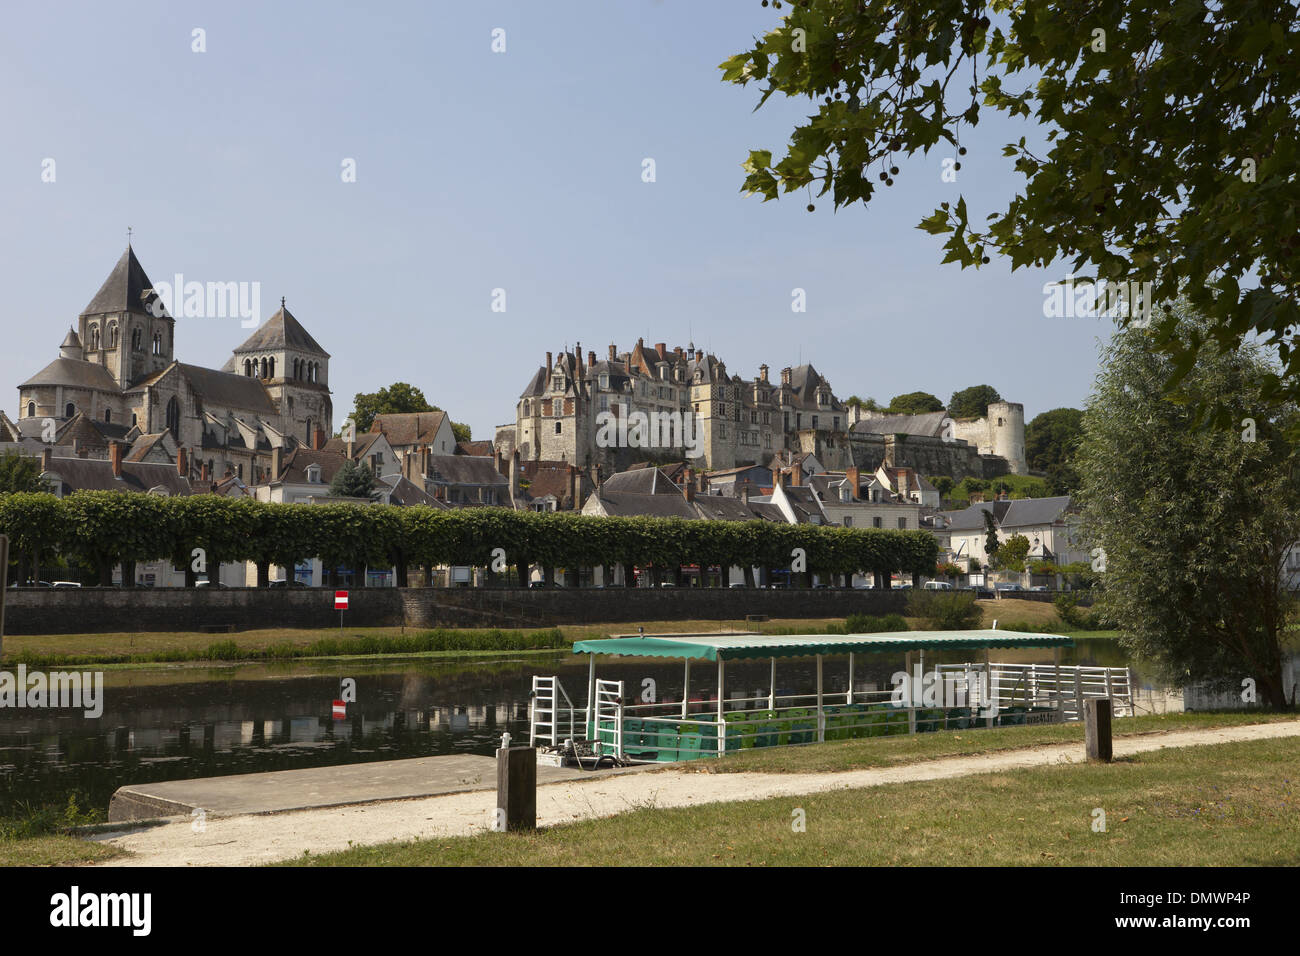 Chateau Saint-Aignan from across the river looking towards the town with a tourist boat in the foreground Stock Photo